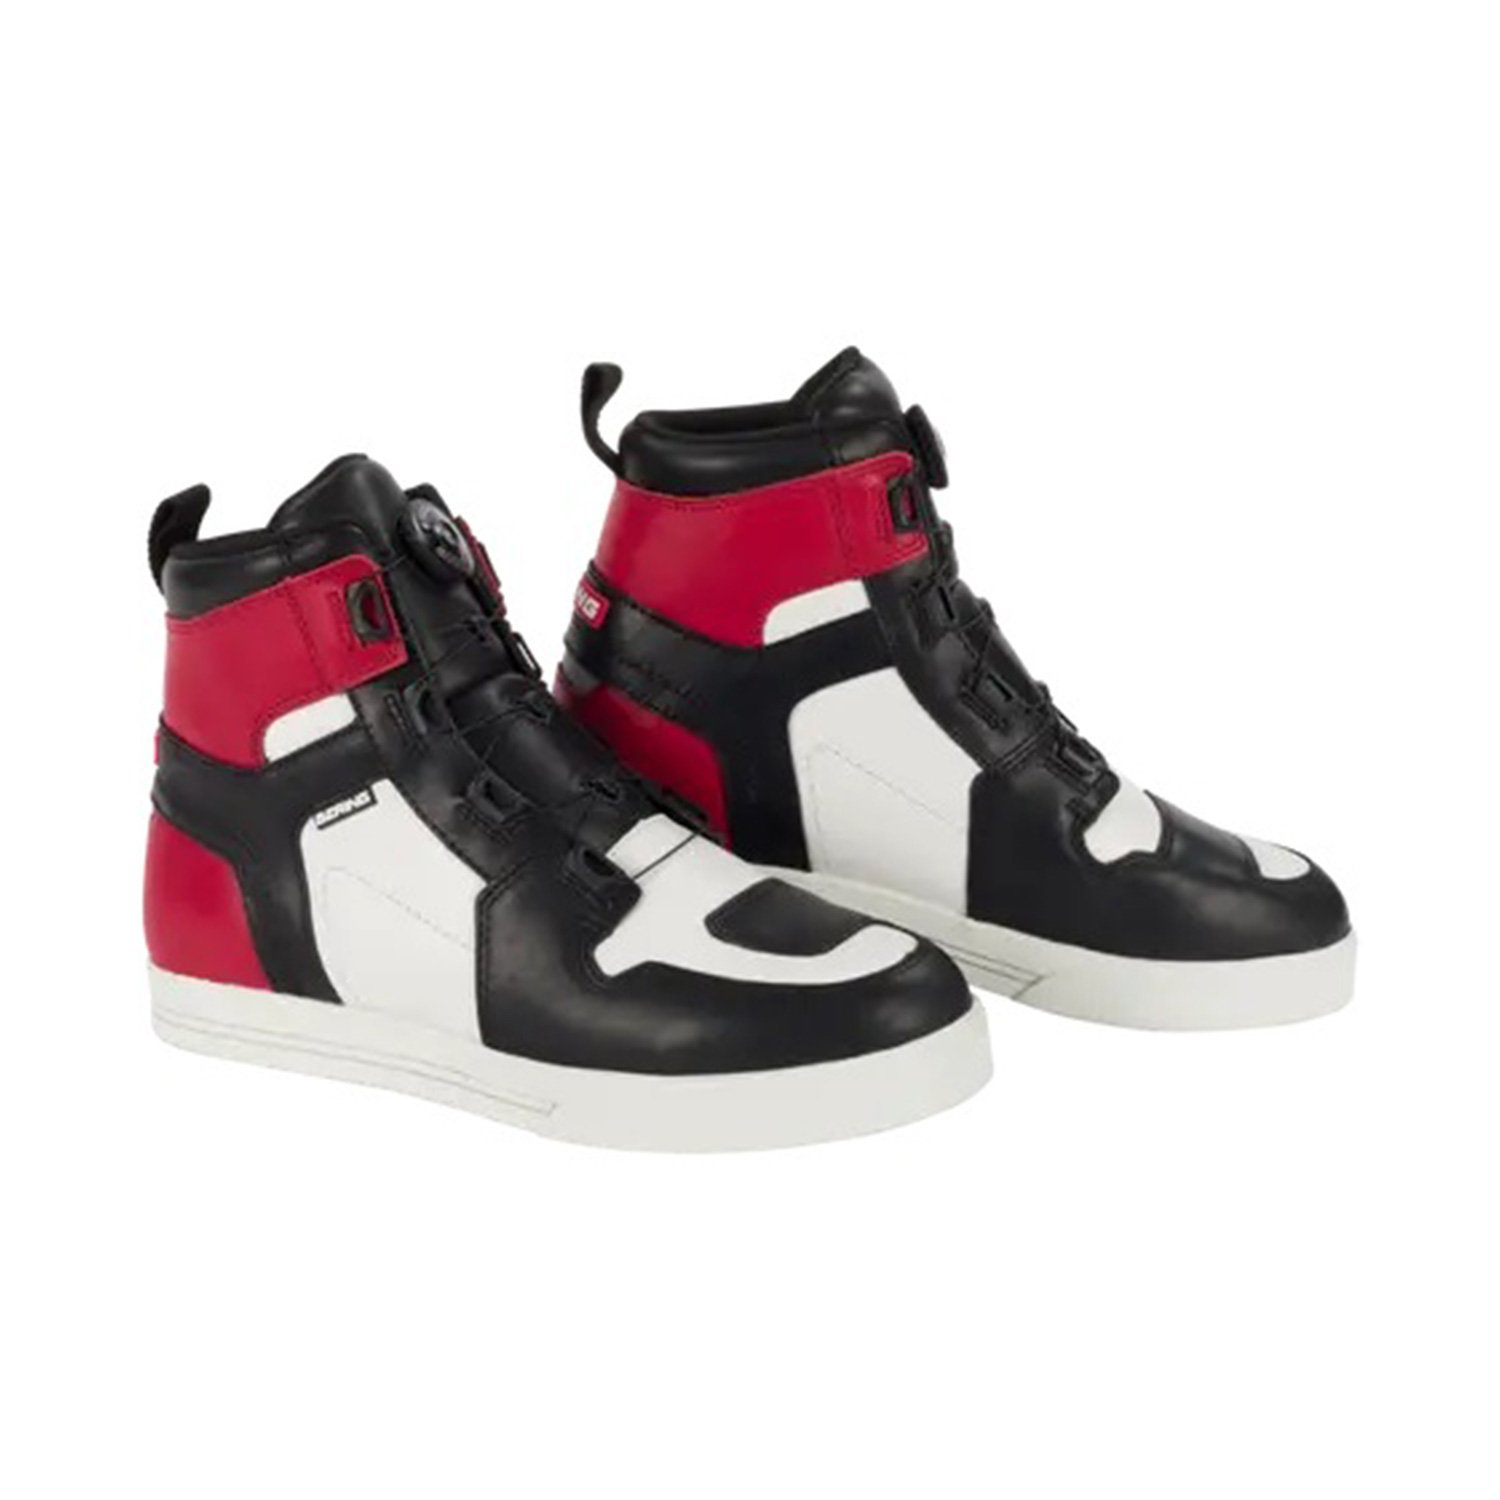 Image of Bering Sneakers Reflex A-Top Black White Red Size 41 EN